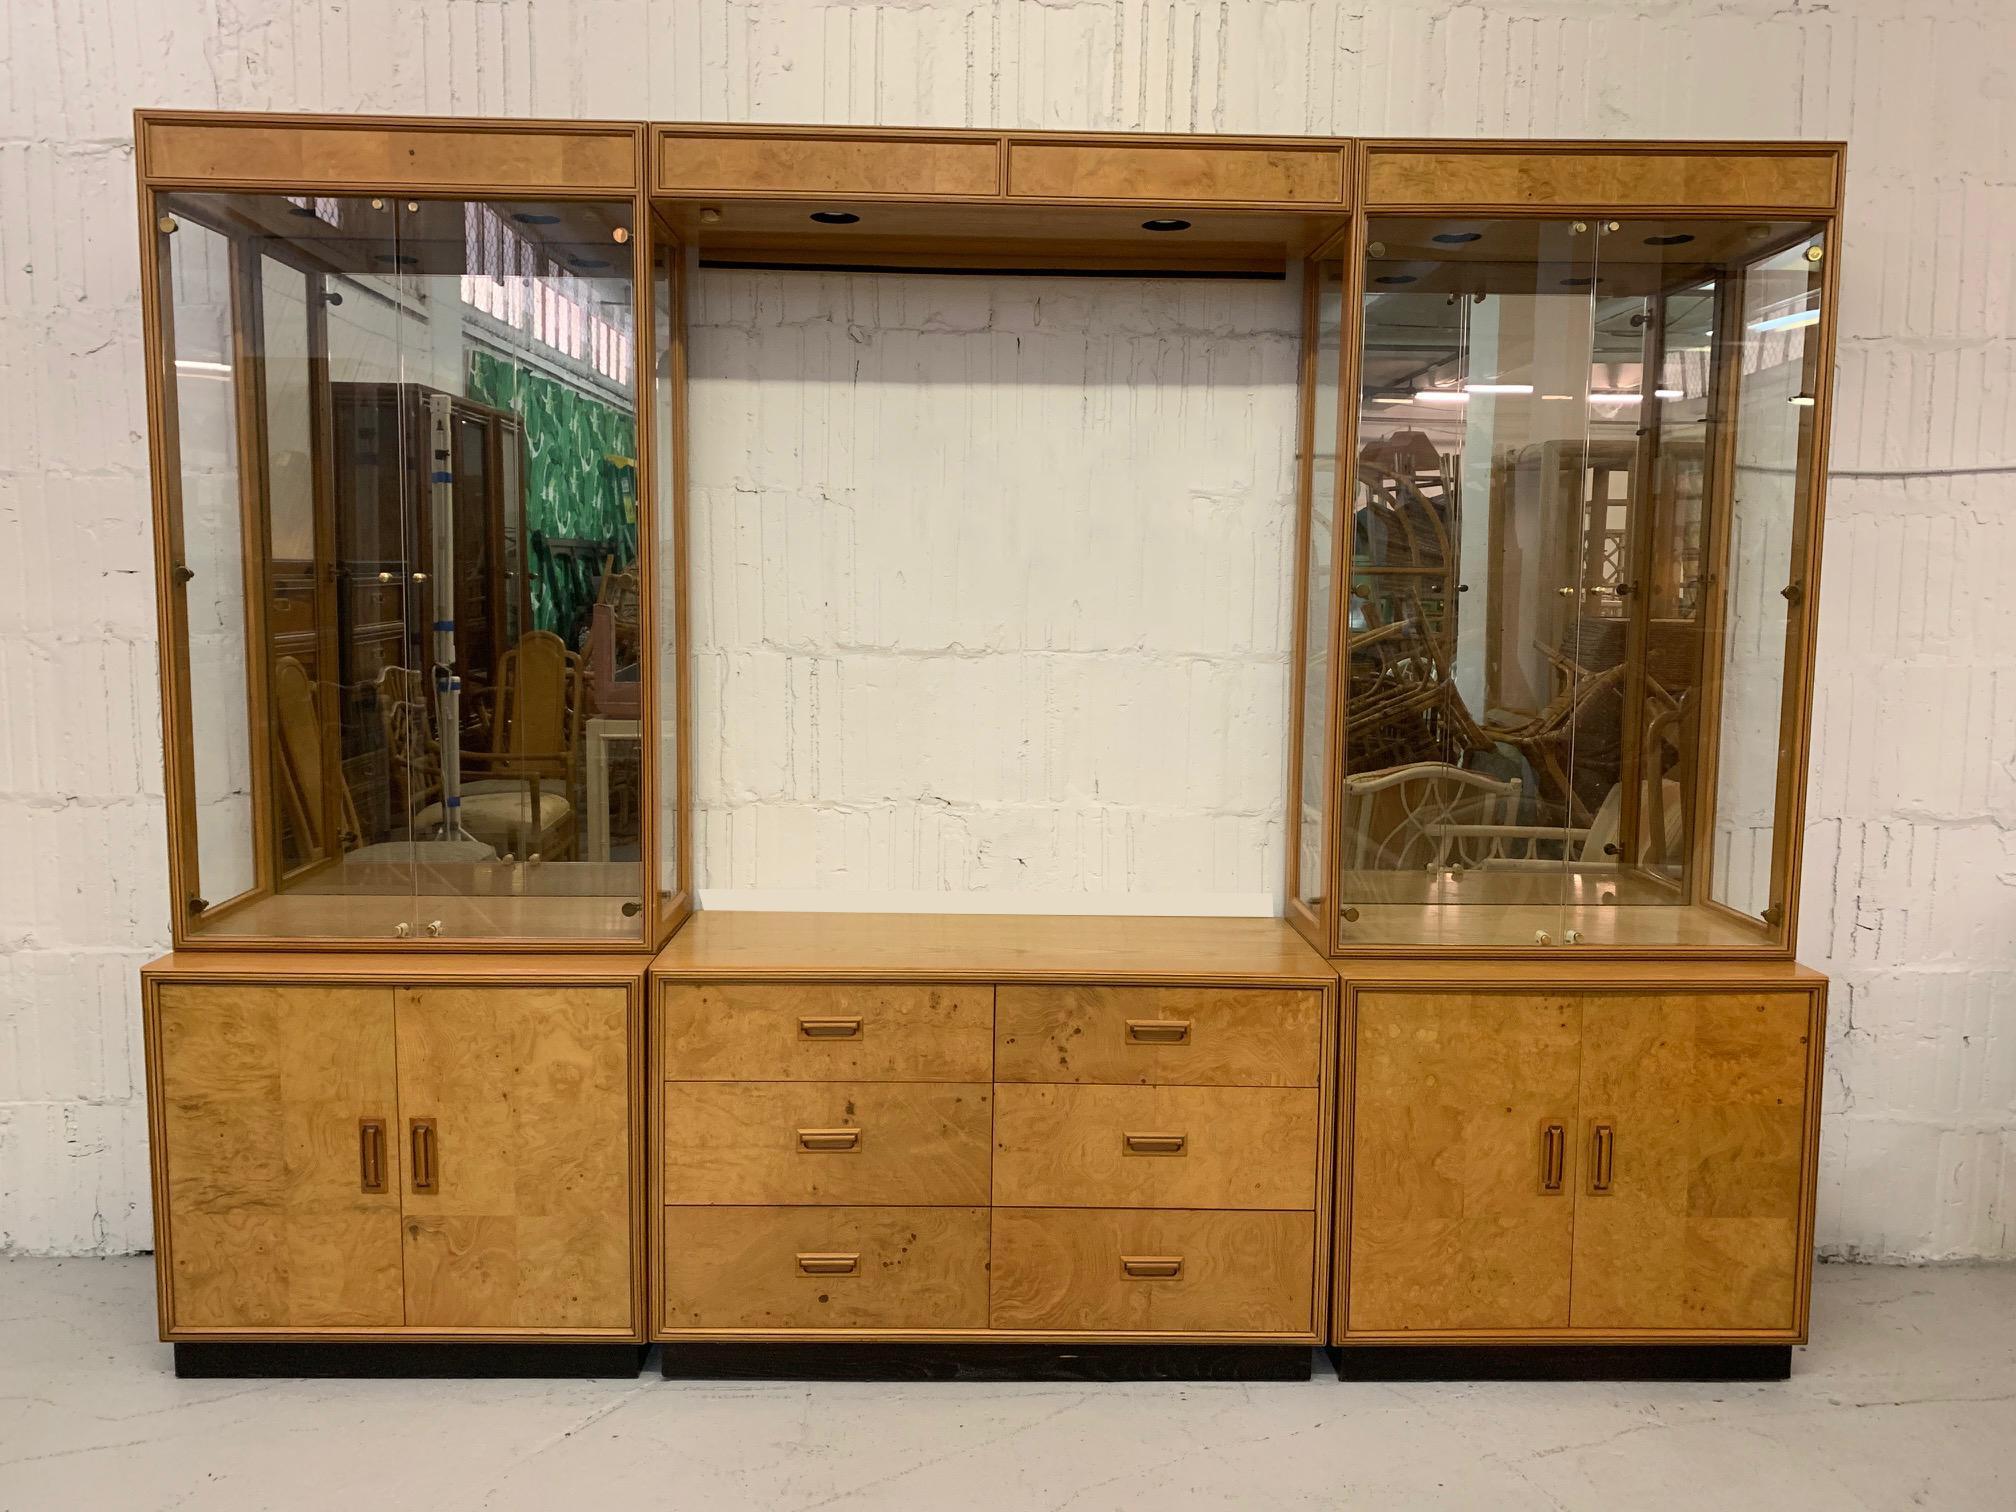 Large Milo Baughman style mid-century modern 6-piece wall unit features patch work burl wood construction, mirrored display cases with glass shelves, and hand inlaid door pulls. From the Henredon 